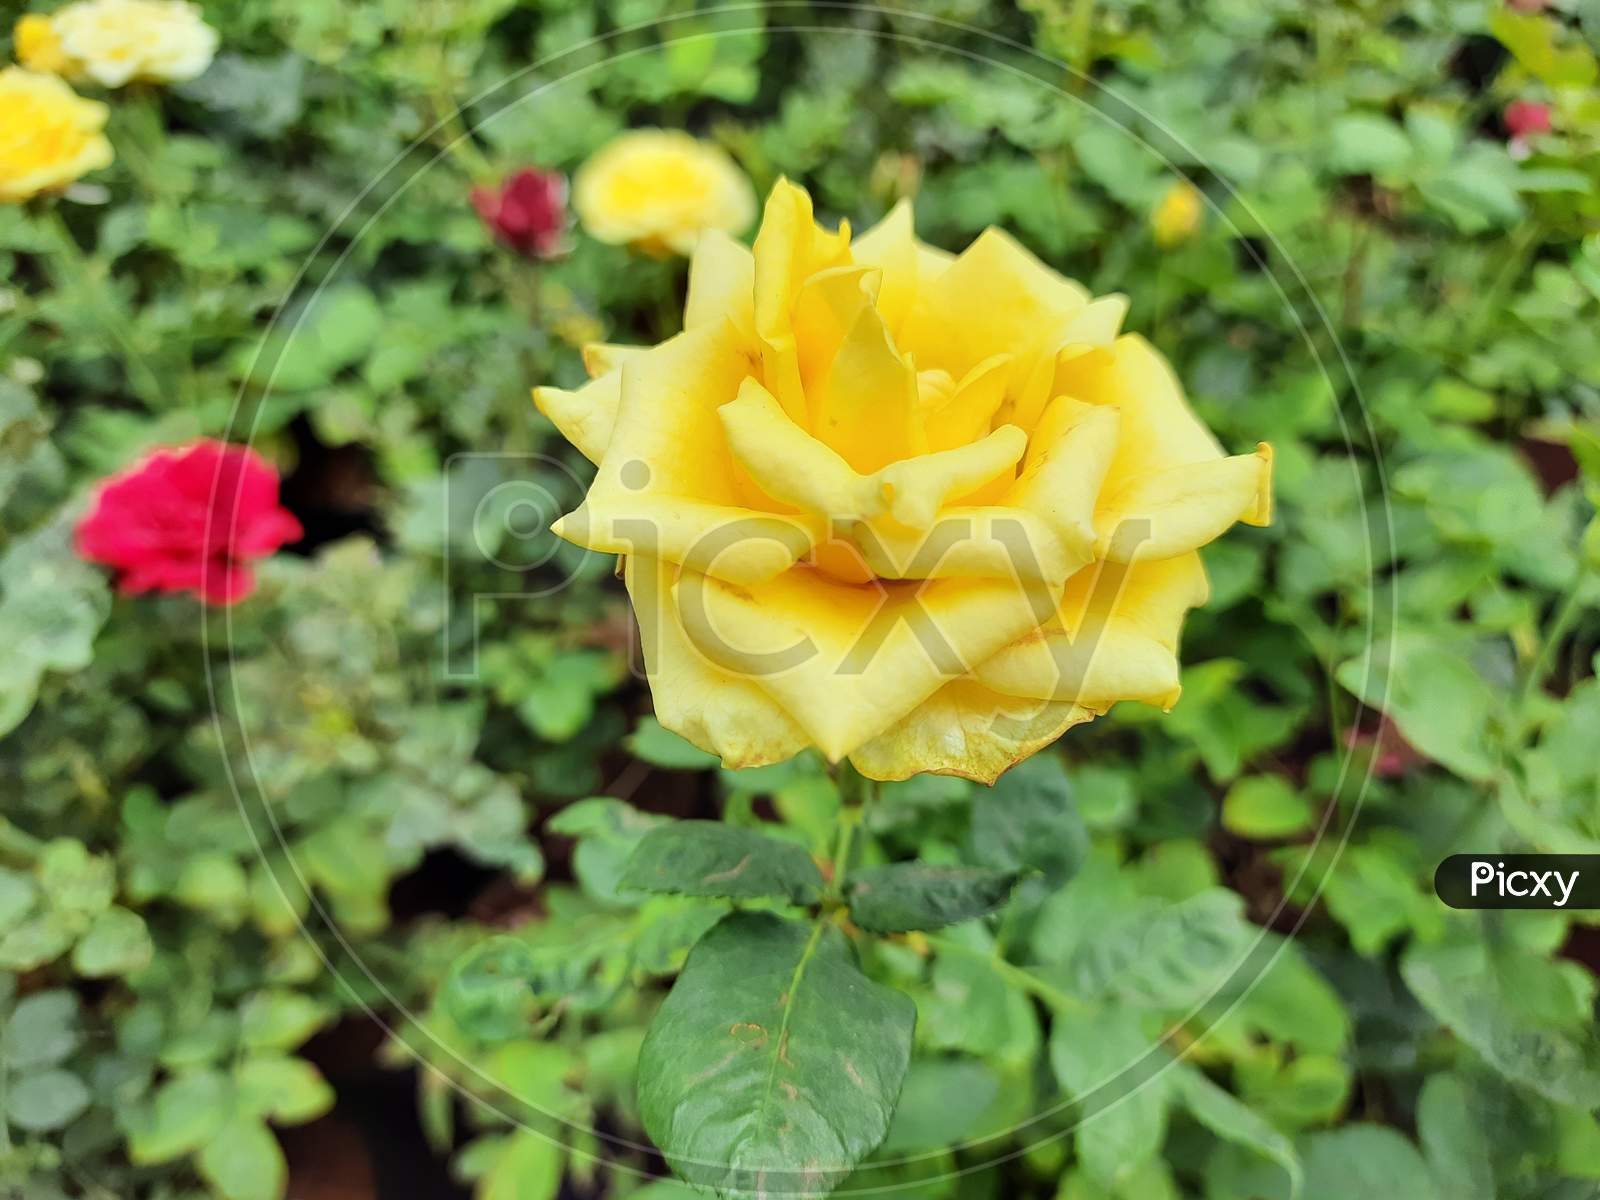 Yellow colour rose looking so beautiful